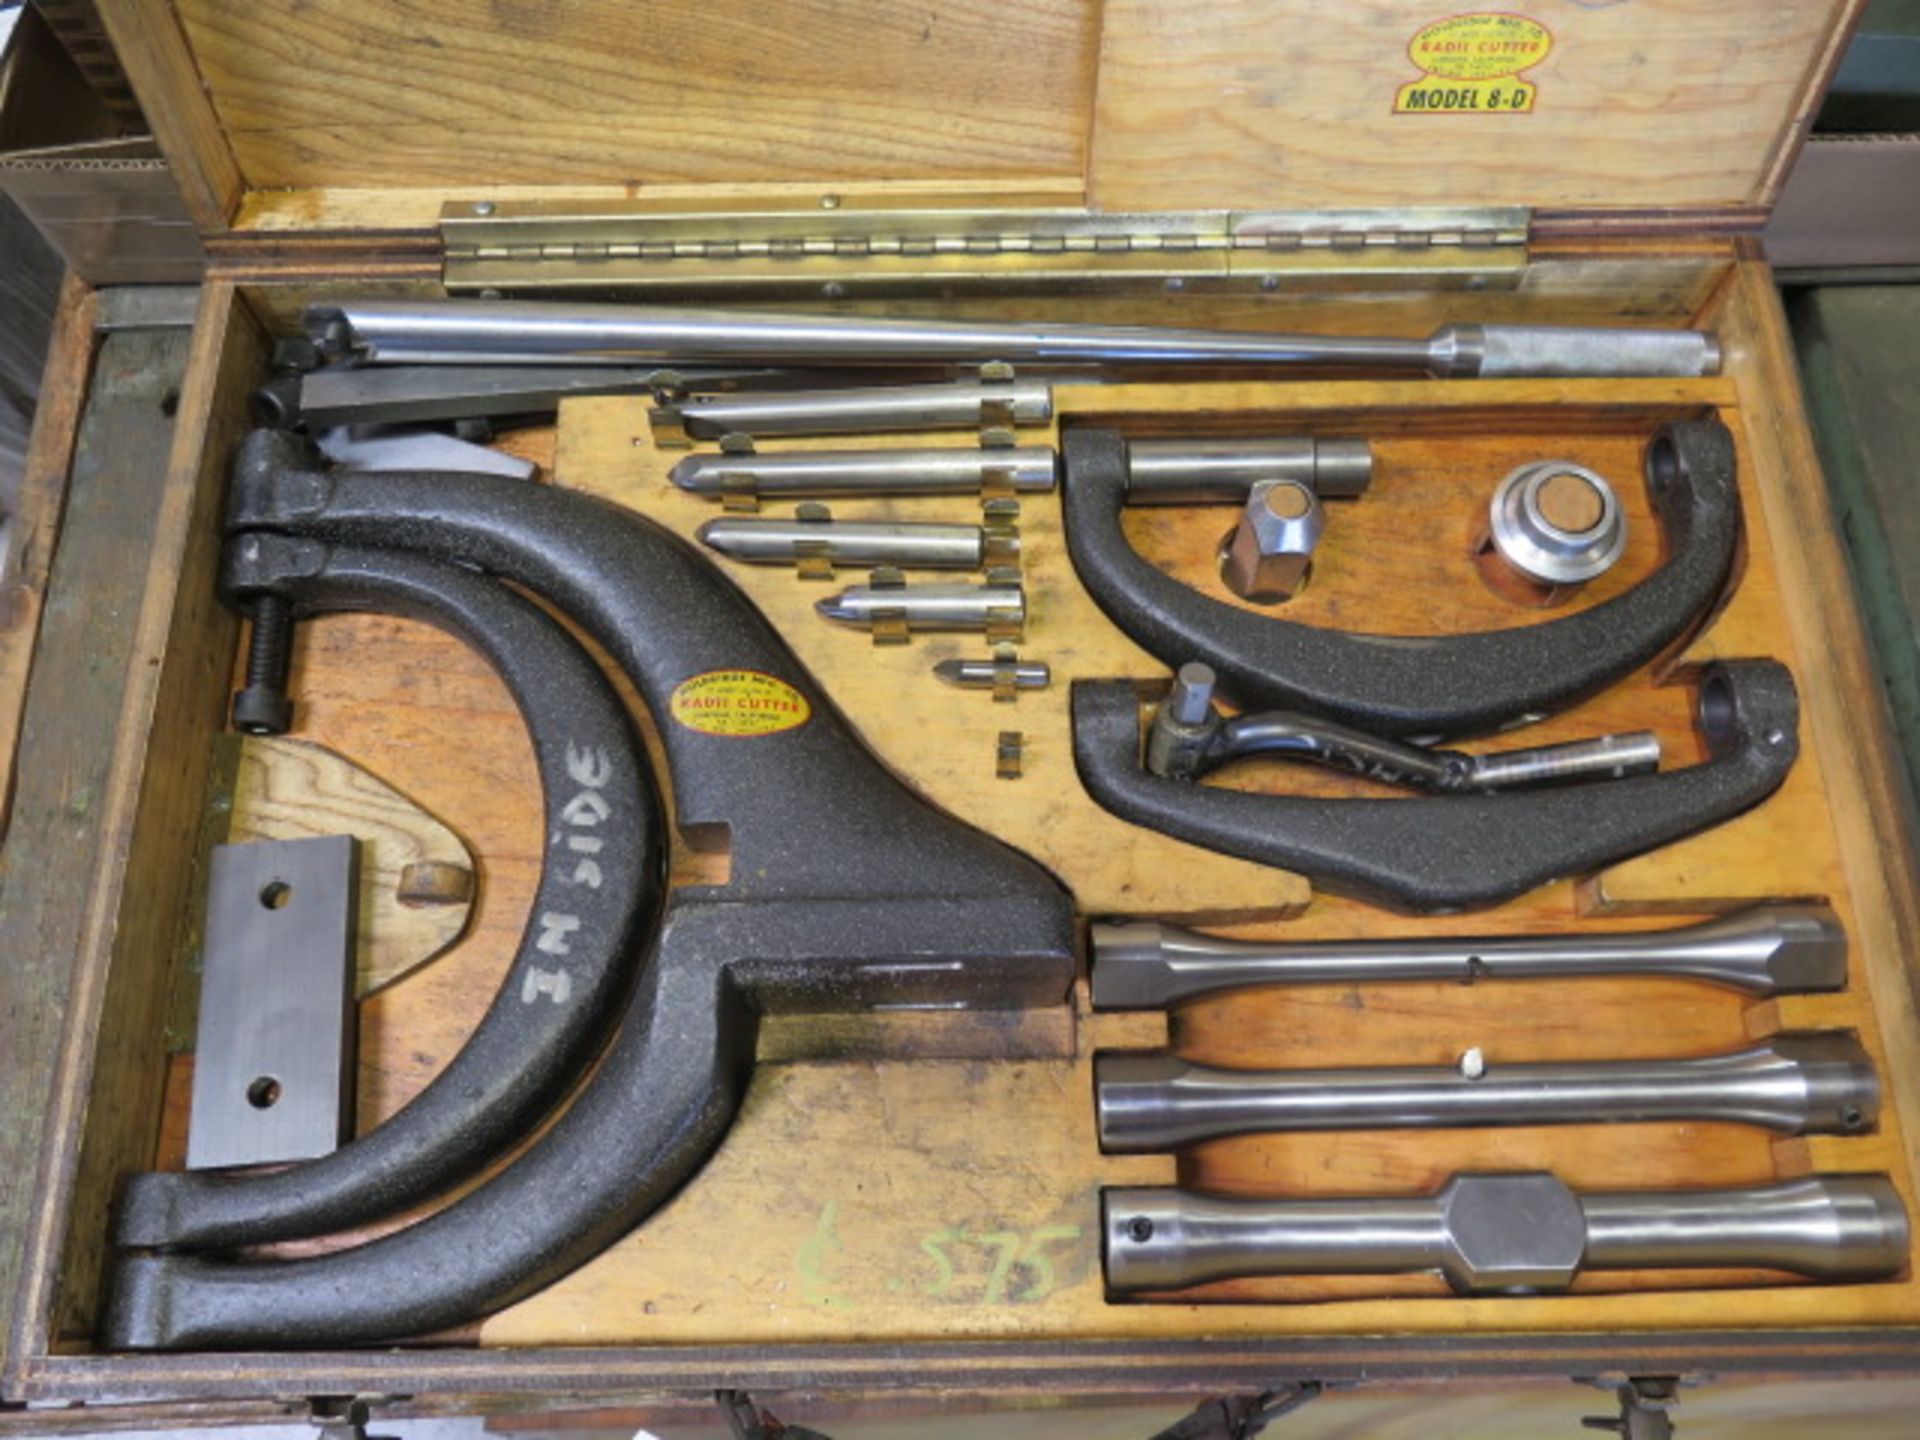 Holdridge No. 8-D Radii Cutter Set (SOLD AS-IS - NO WARRANTY) - Image 3 of 7